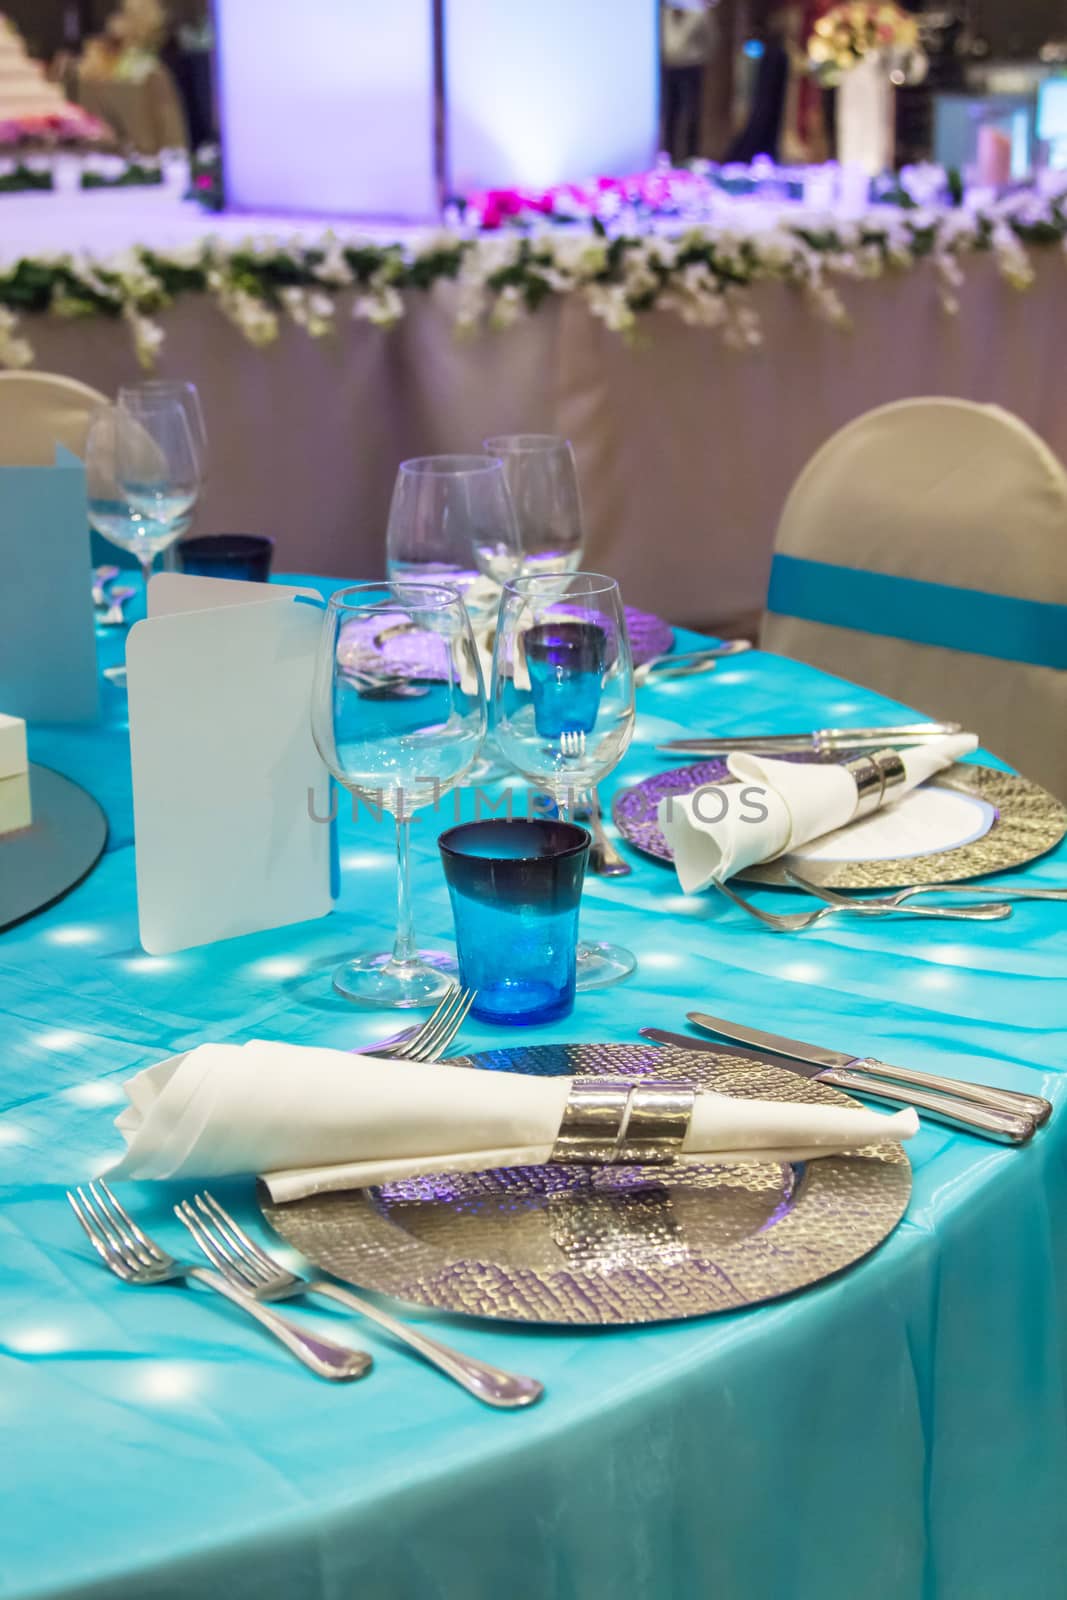 Table set for event party or wedding reception